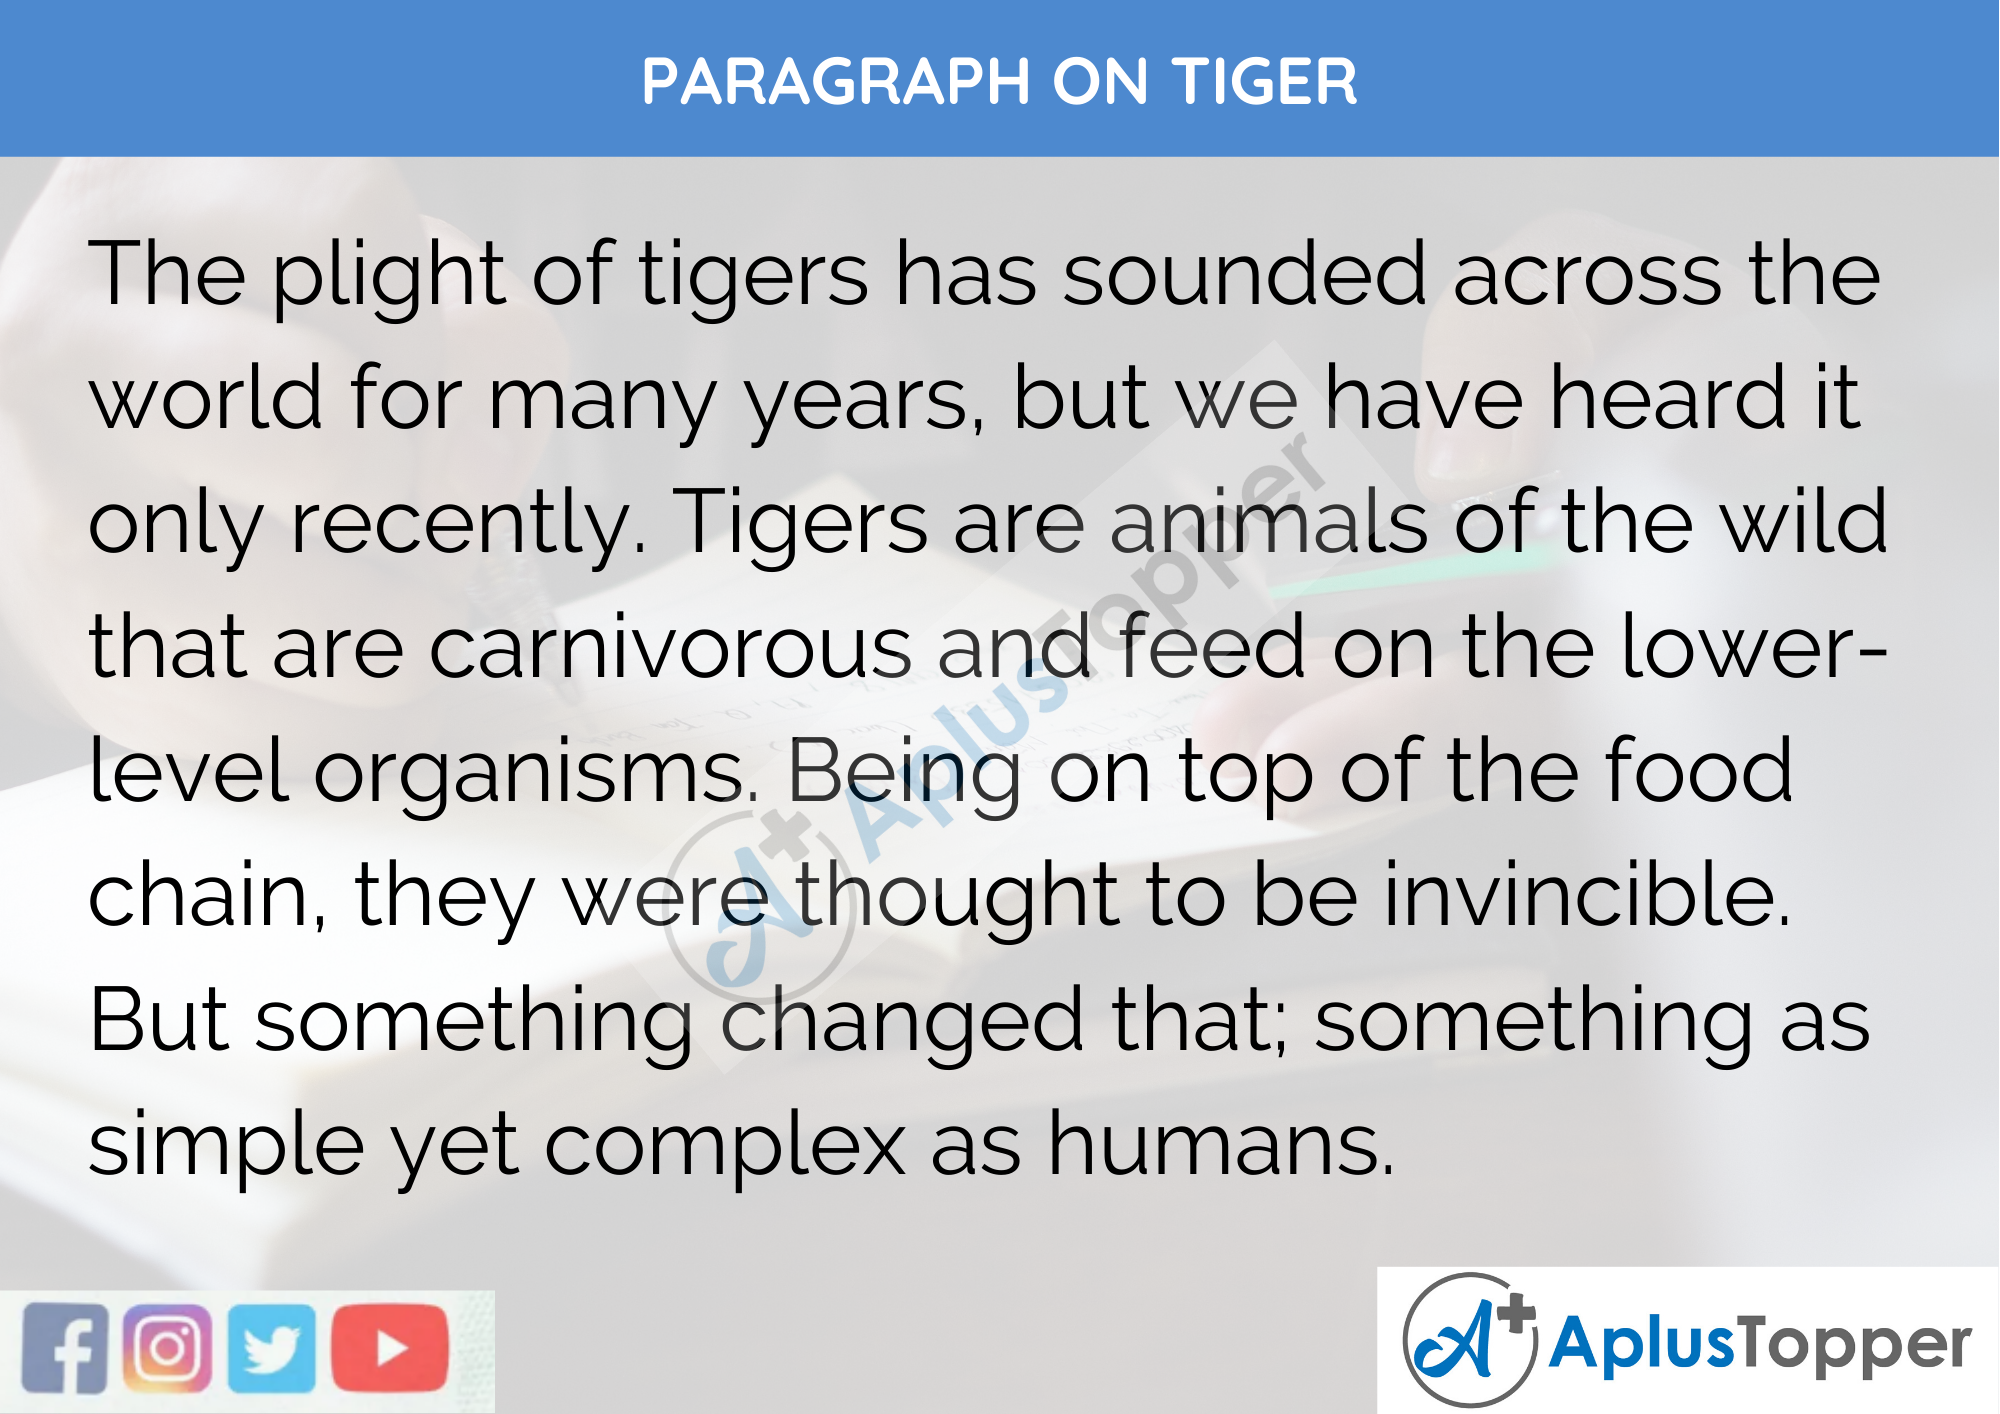 Paragraph on Tiger - 250 Words for Classes 9, 10, 11, 12 and Competitive Exams